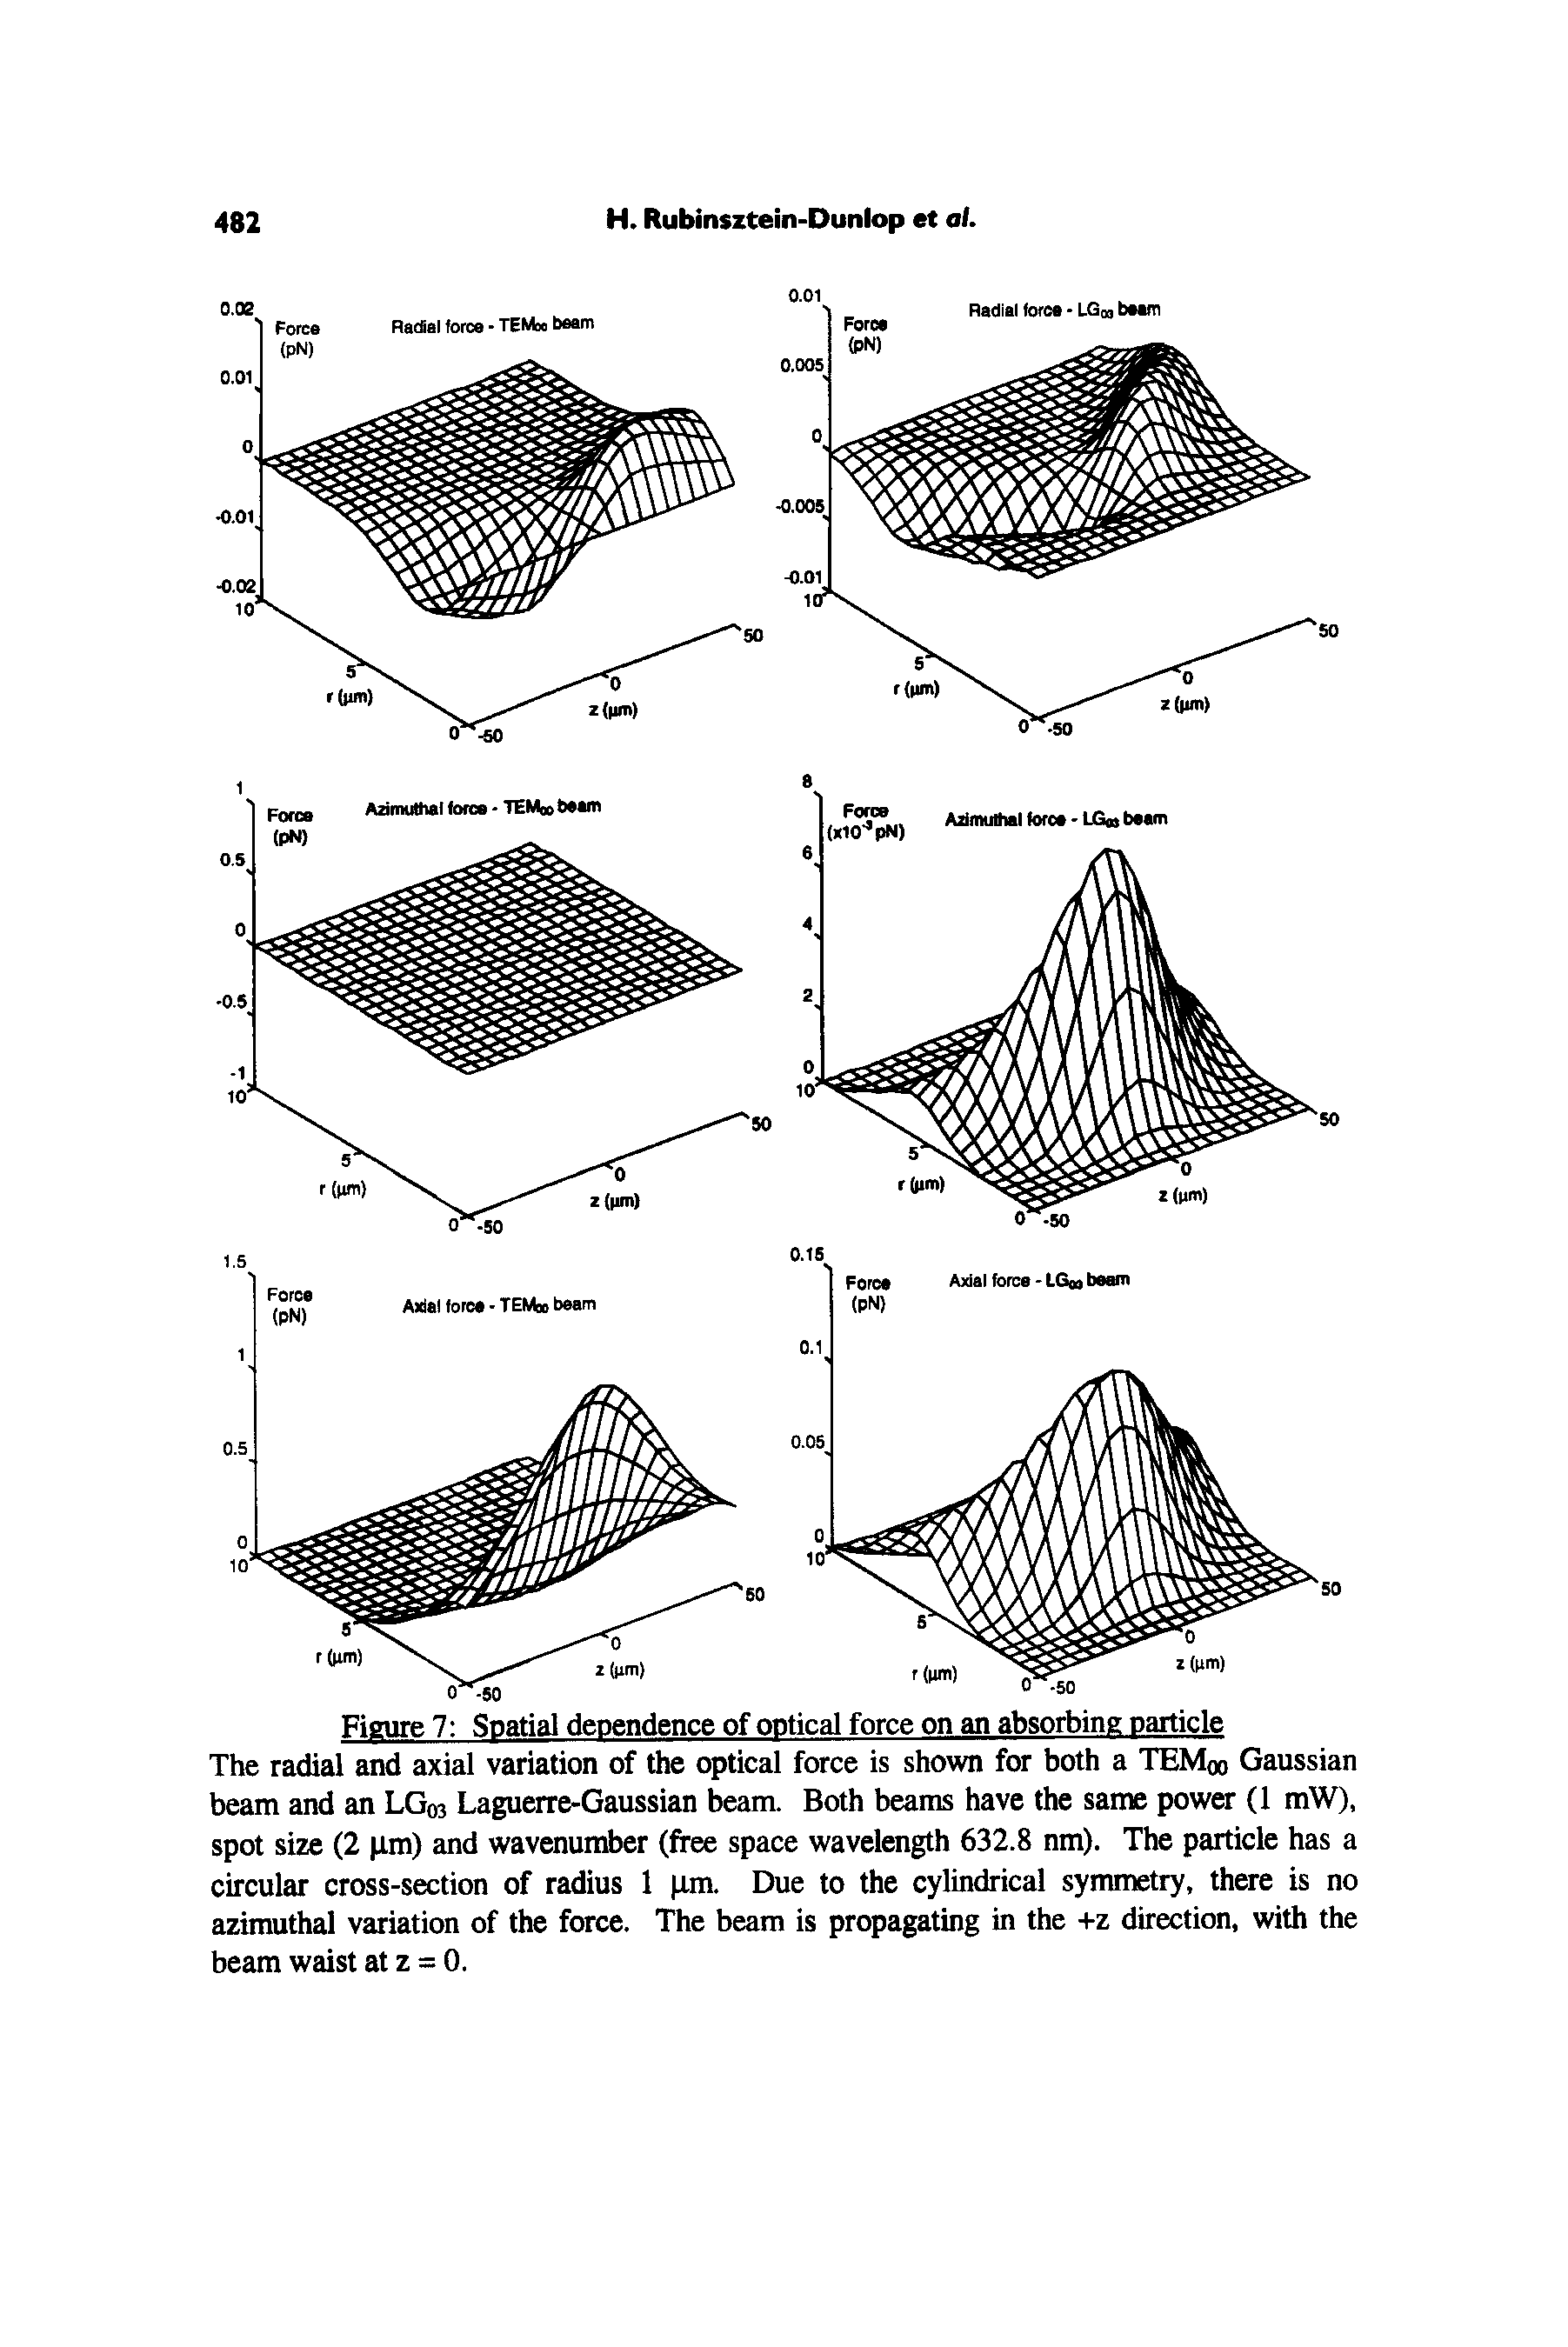 Figure 7 Spatial dependence of optical force on an absorbing particle The radial and axial variation of the optical force is shown for both a TEMoo Gaussian beam and an LG03 Laguerre-Gaussian beam. Both beams have the same power (1 mW), spot size (2 urn) and wavenumber (free space wavelength 632.8 nm). The particle has a circular cross-section of radius 1 pm. Due to the cylindrical symmetry, there is no azimuthal variation of the force. The beam is propagating in the +z direction, with the beam waist at z = 0.